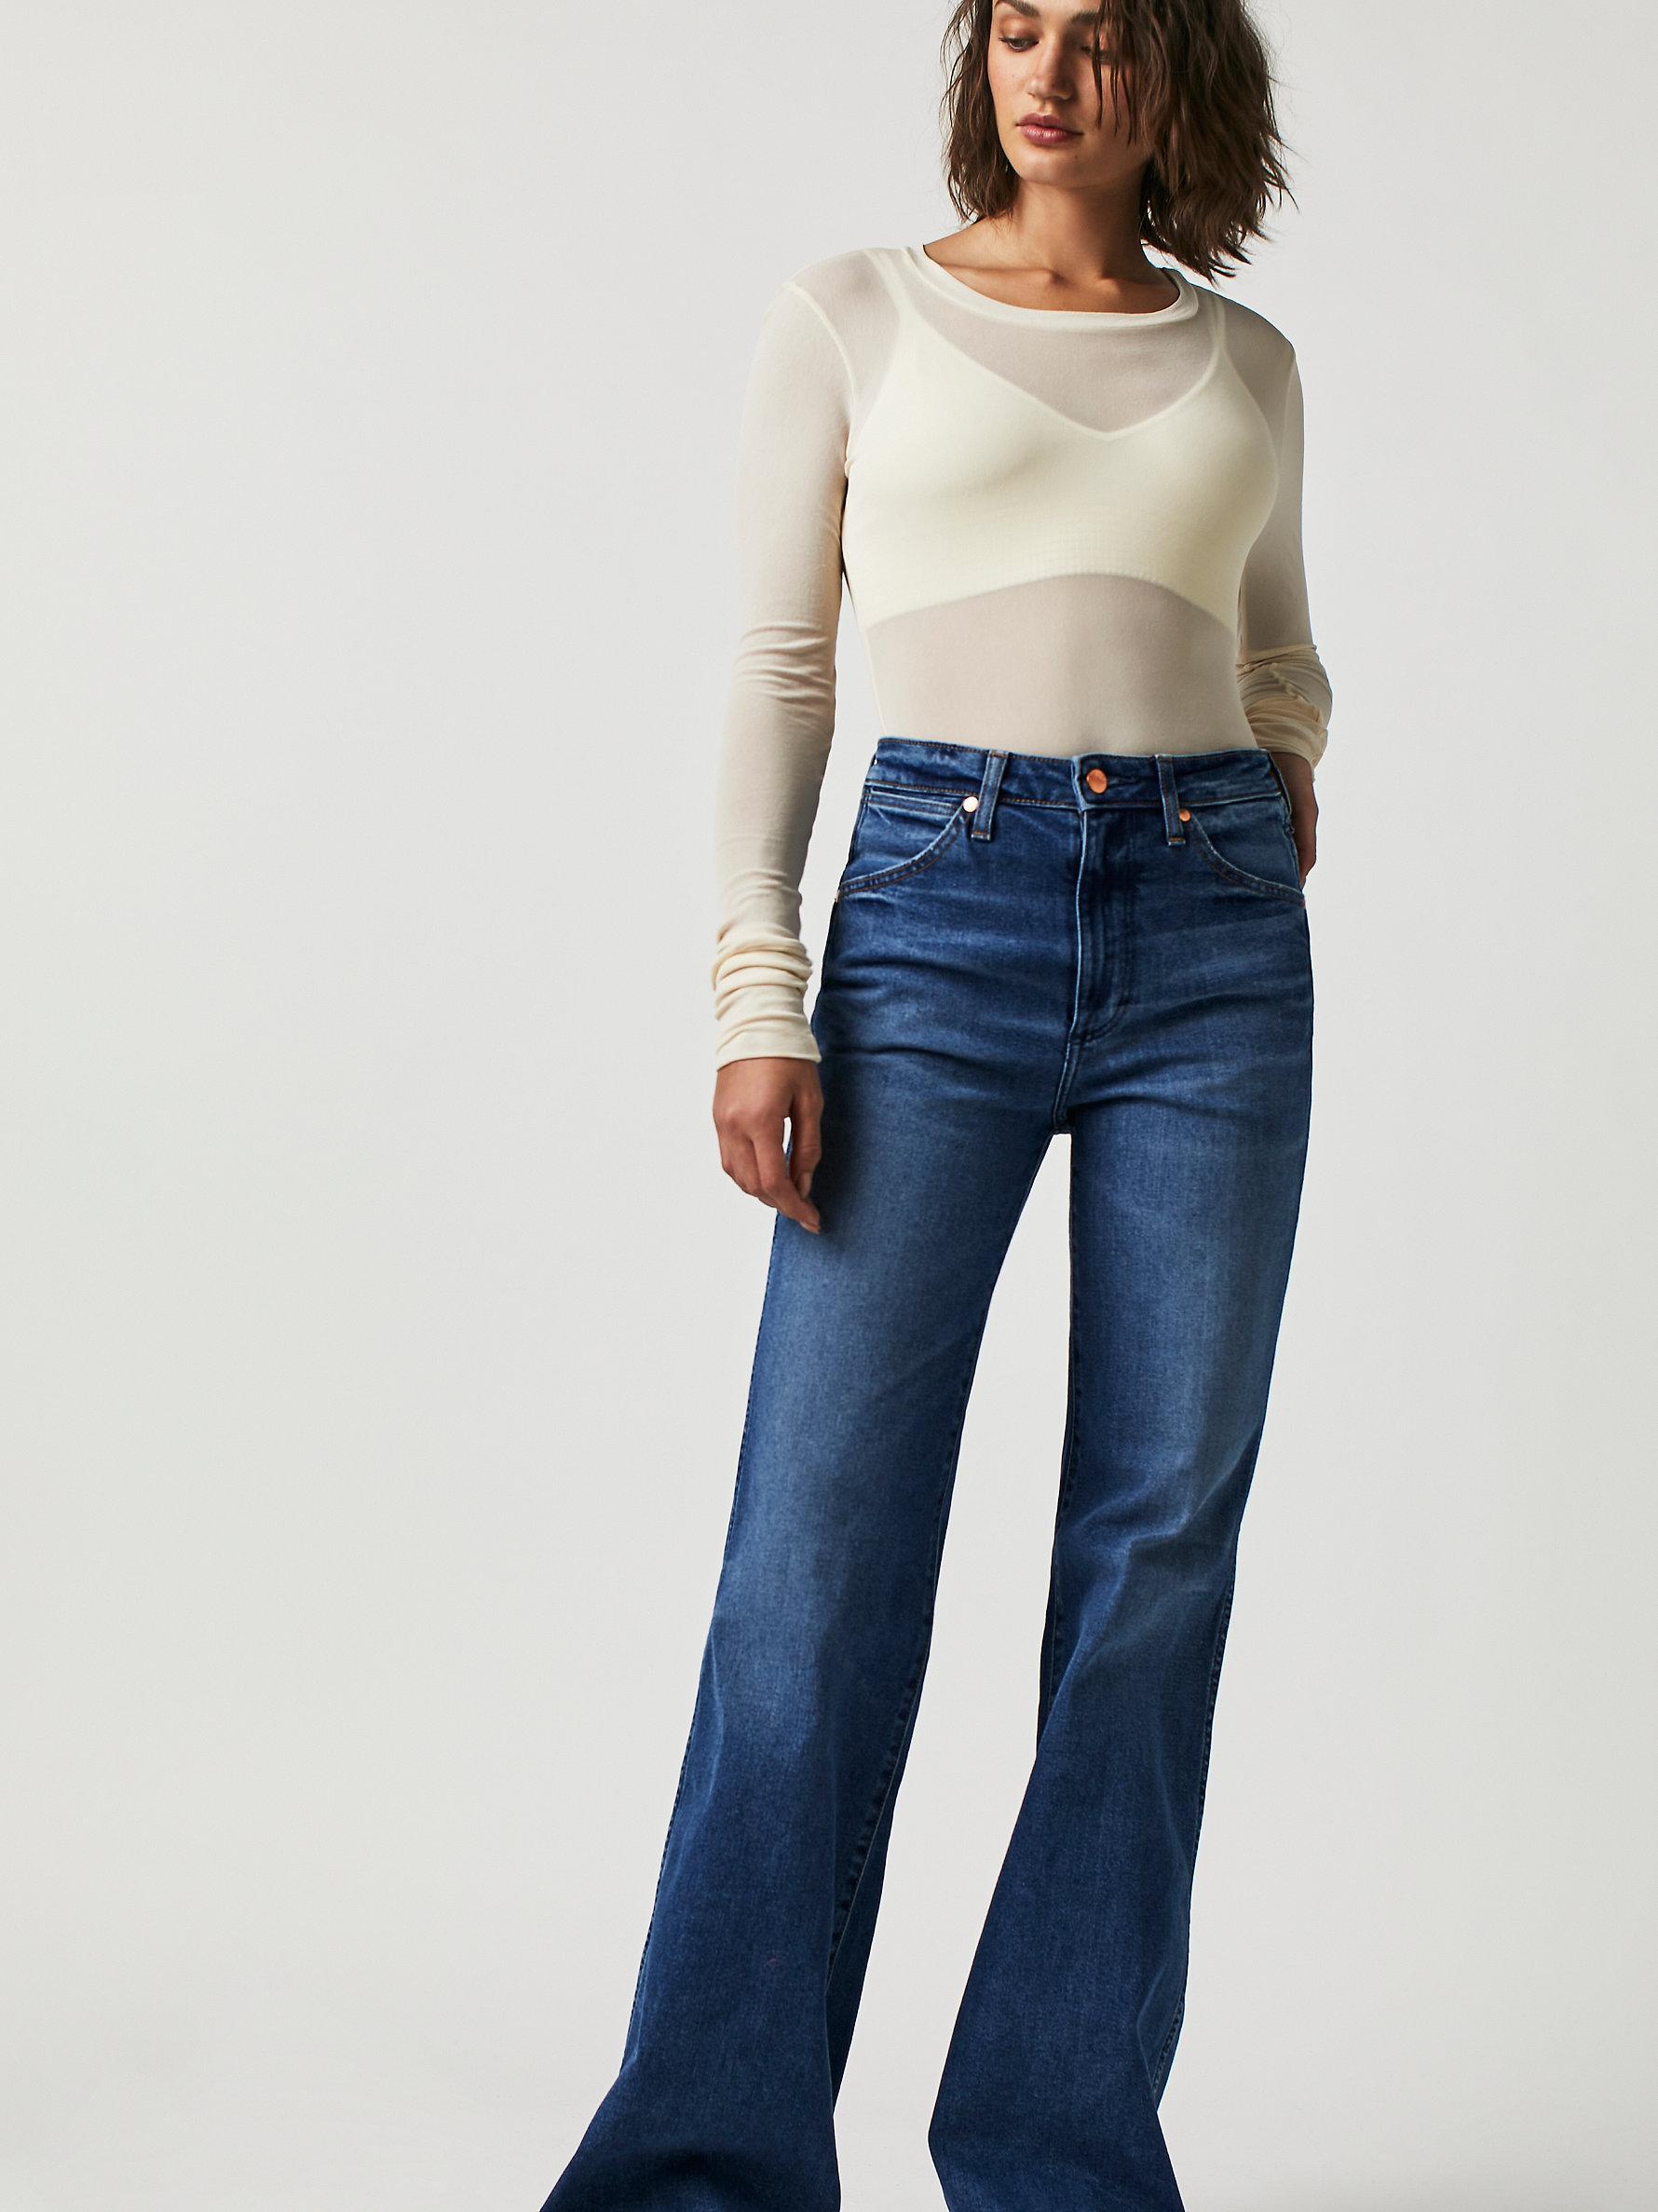 Free People Wrangler Wanderer High Rise Flare Jeans in Blue | Lyst